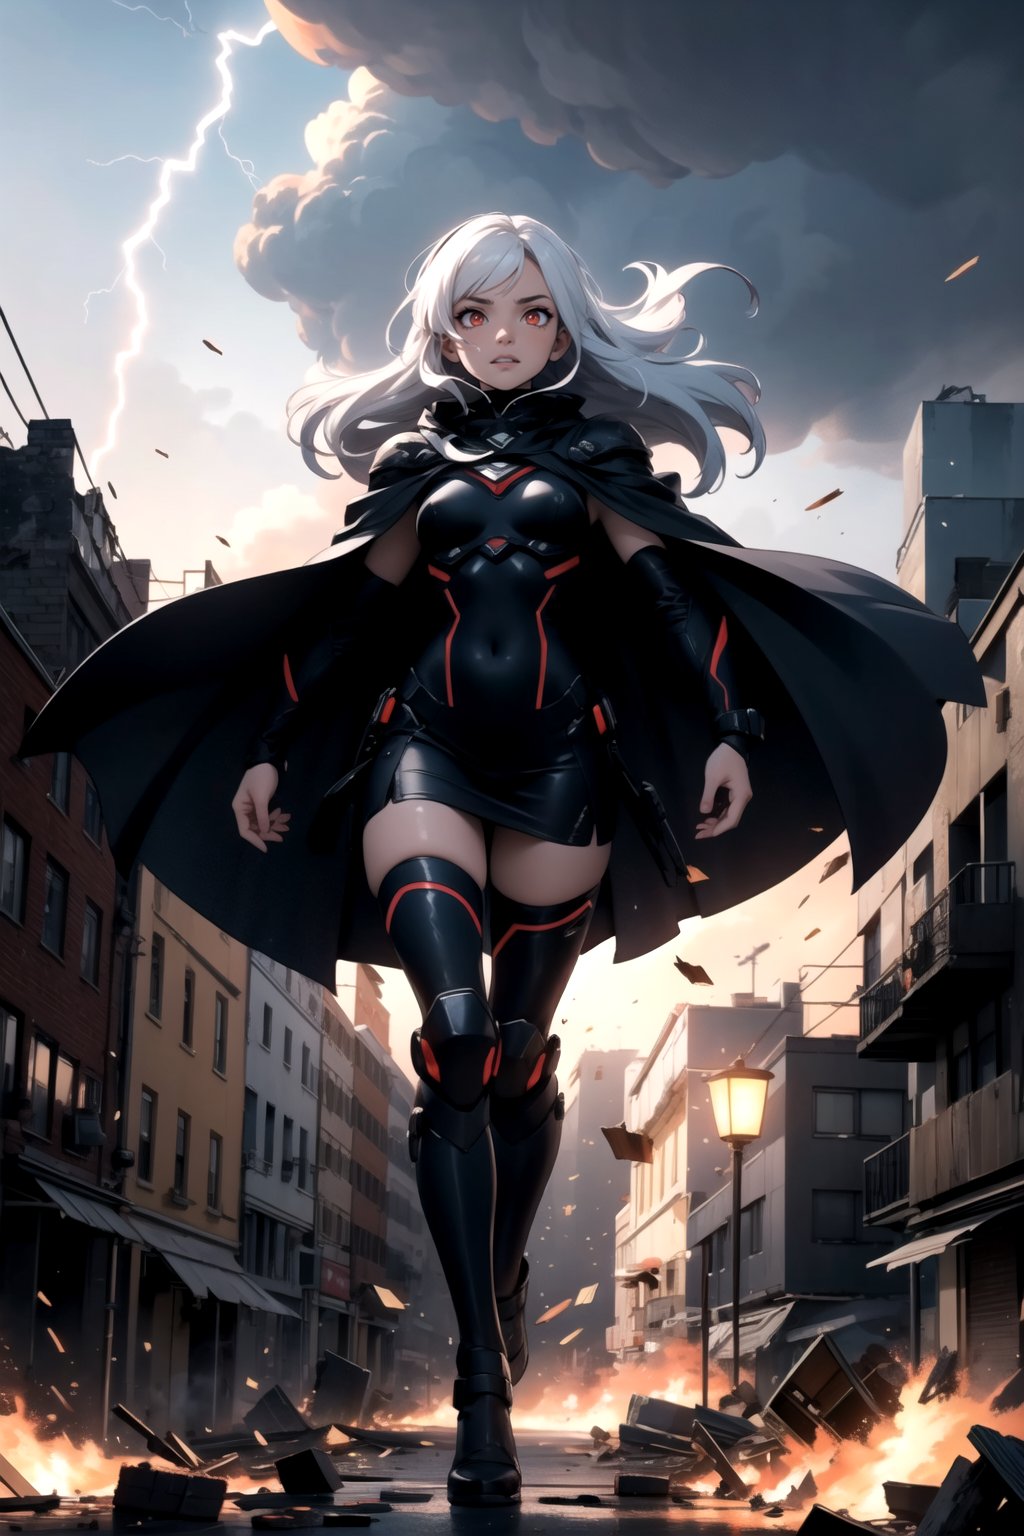 masterpiece, top quality, best quality, 1girl in t-pose, levitating, sparks, windy, cape, hovering, destroyed city, apocalypse, dystopian city in flames, long white hair, colorful, highest detailed, hypermaximalistic, flying debris, zero gravity, shooting lightning from hands, red glowing eyes, evil villain, lens flares, dark clouds, whole body photo, perfect body shape, propotionate